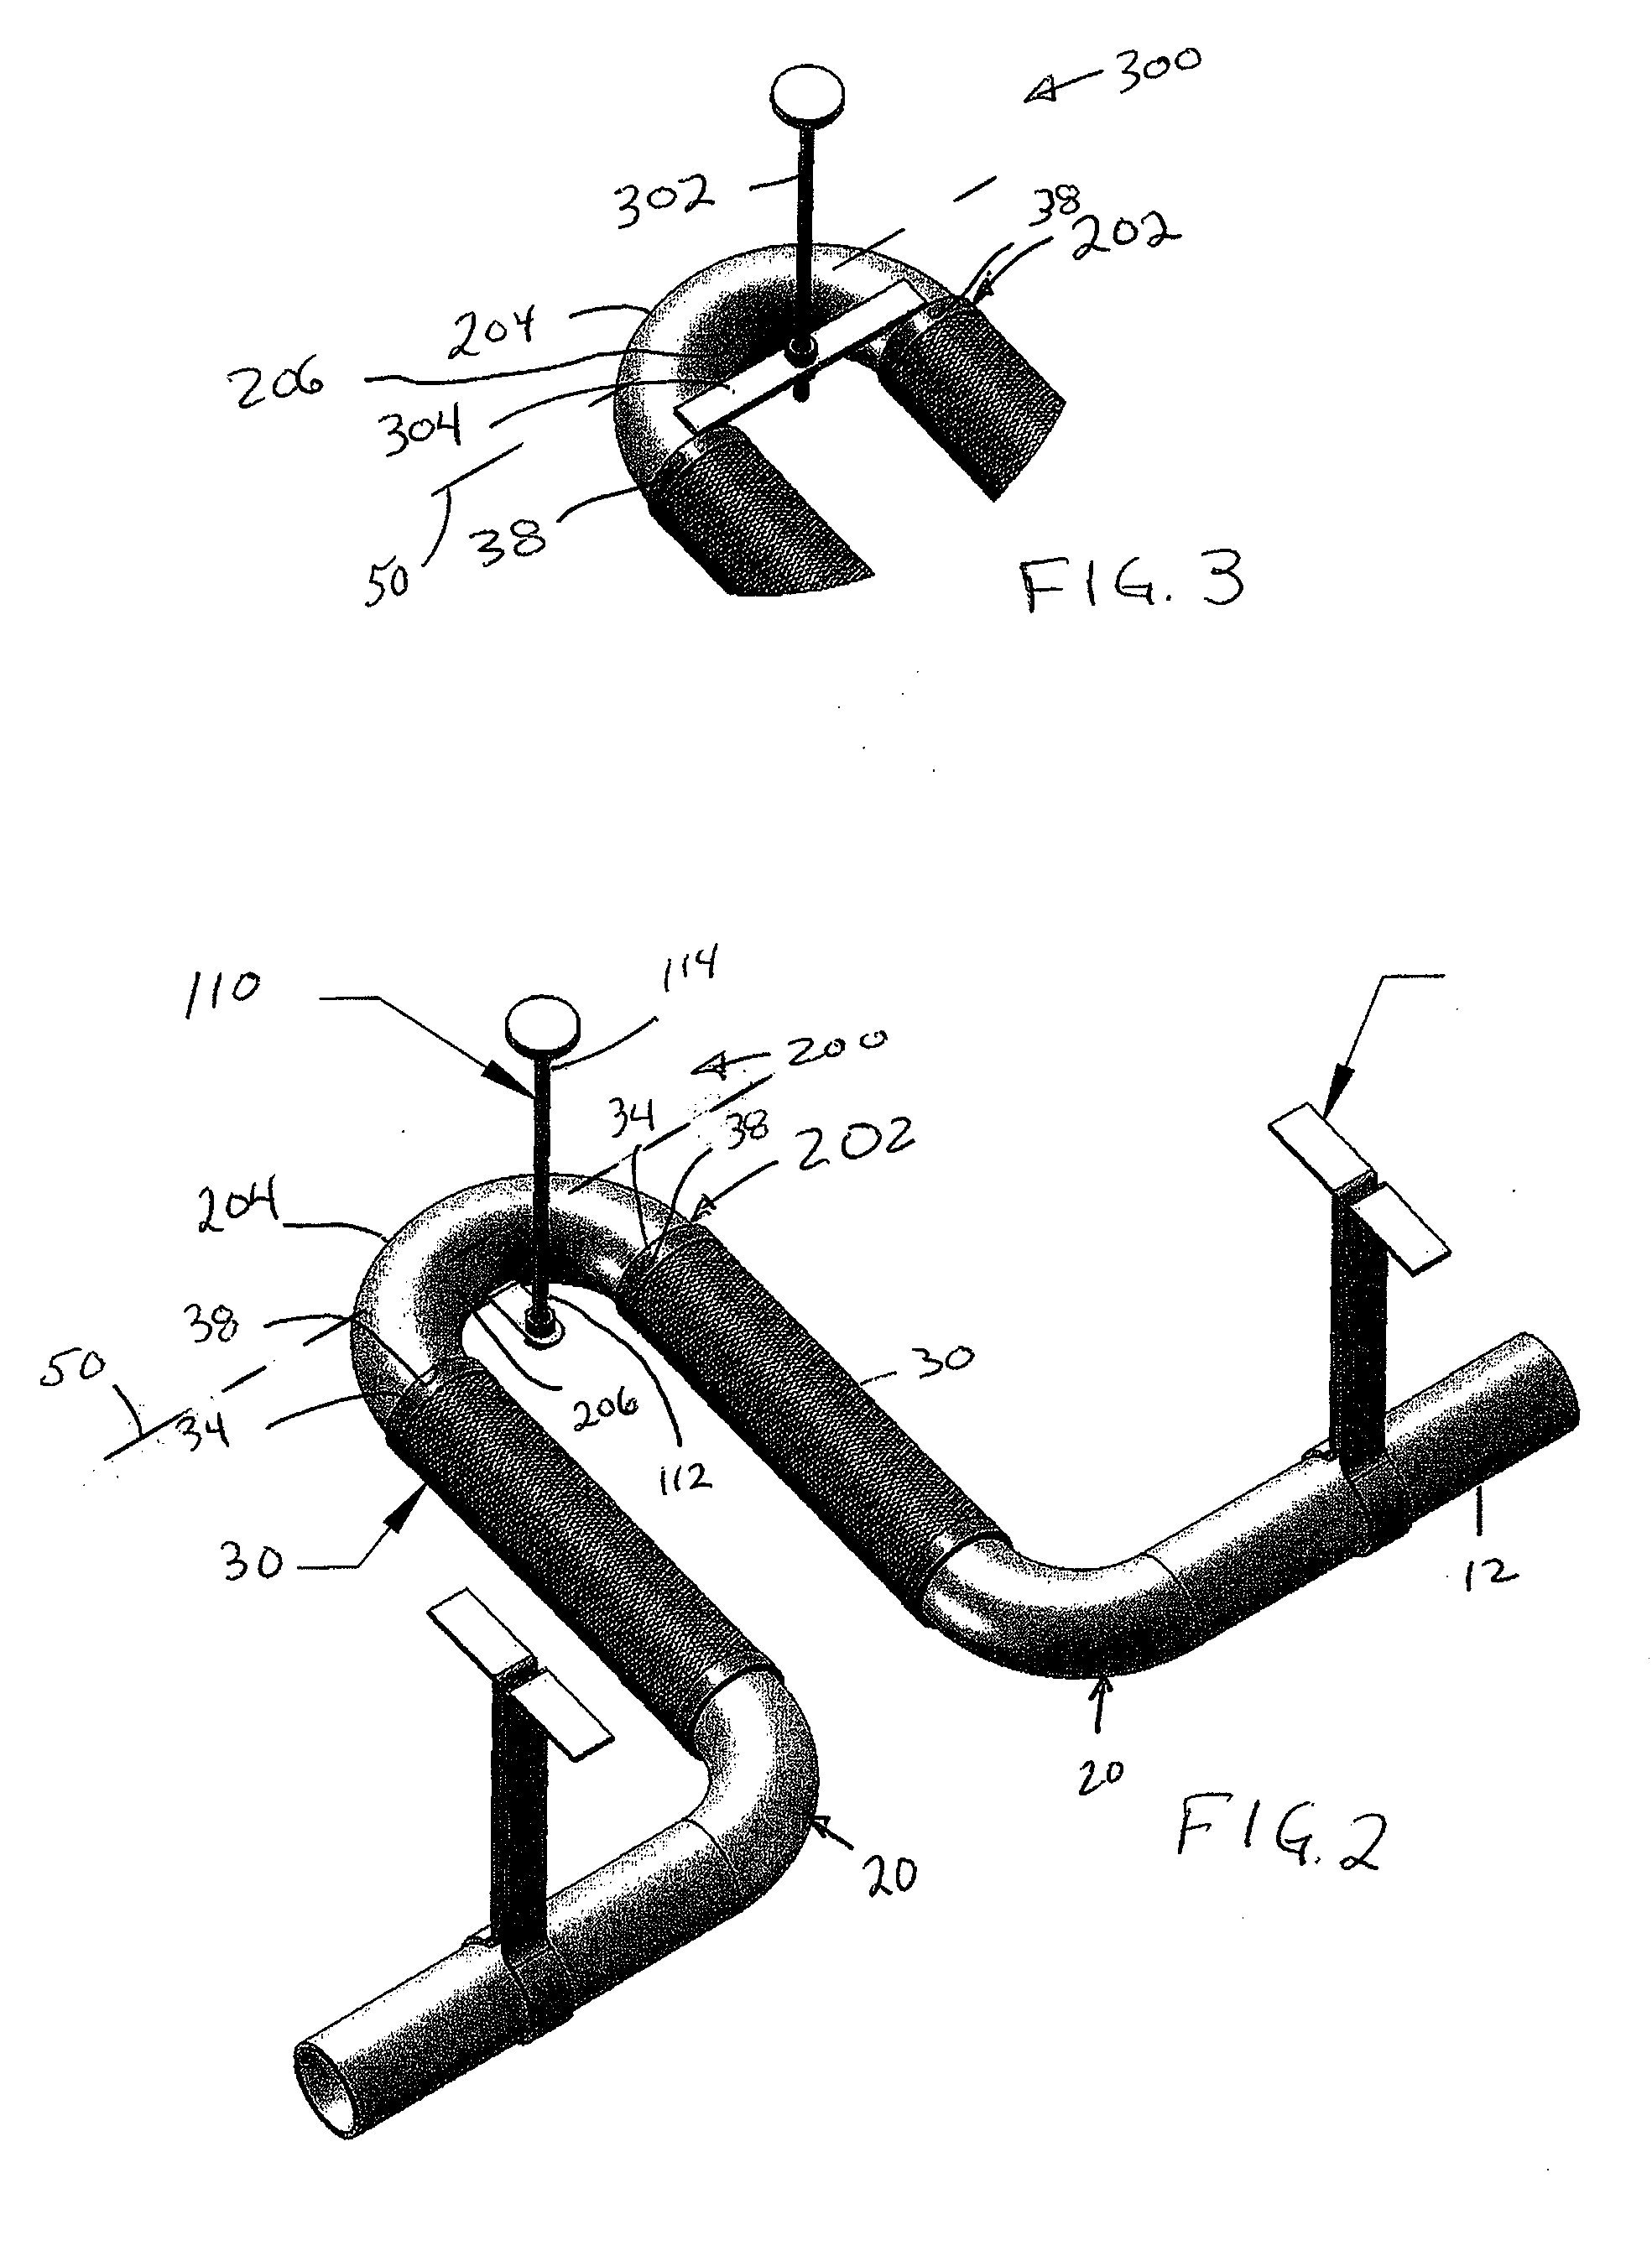 Support system for flexible pipe